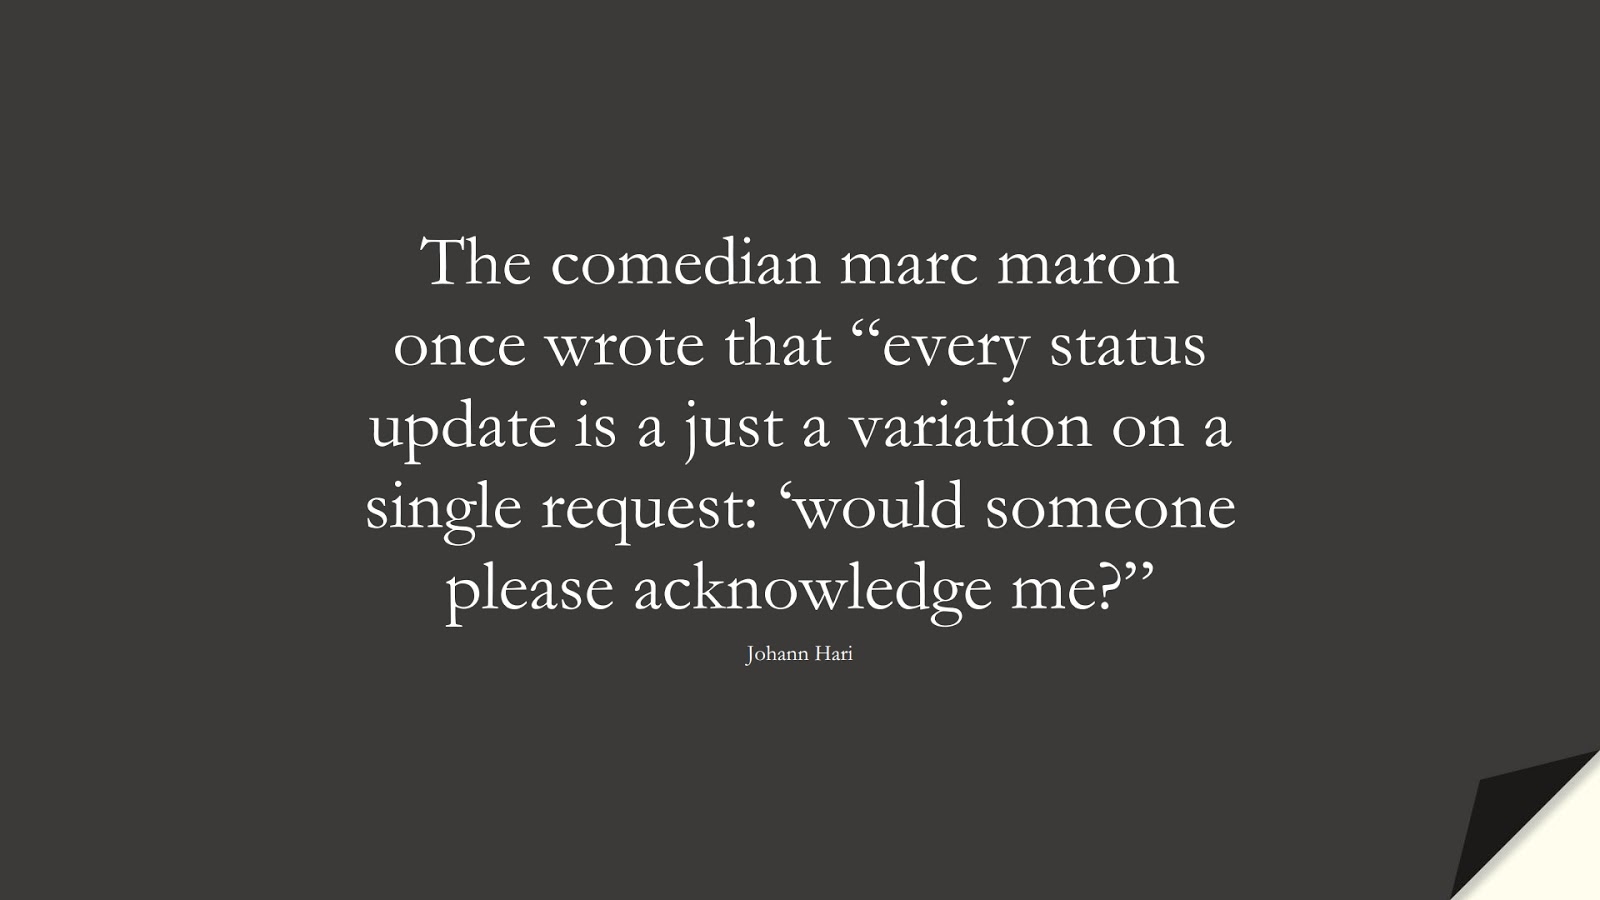 The comedian marc maron once wrote that “every status update is a just a variation on a single request: ‘would someone please acknowledge me?” (Johann Hari);  #DepressionQuotes